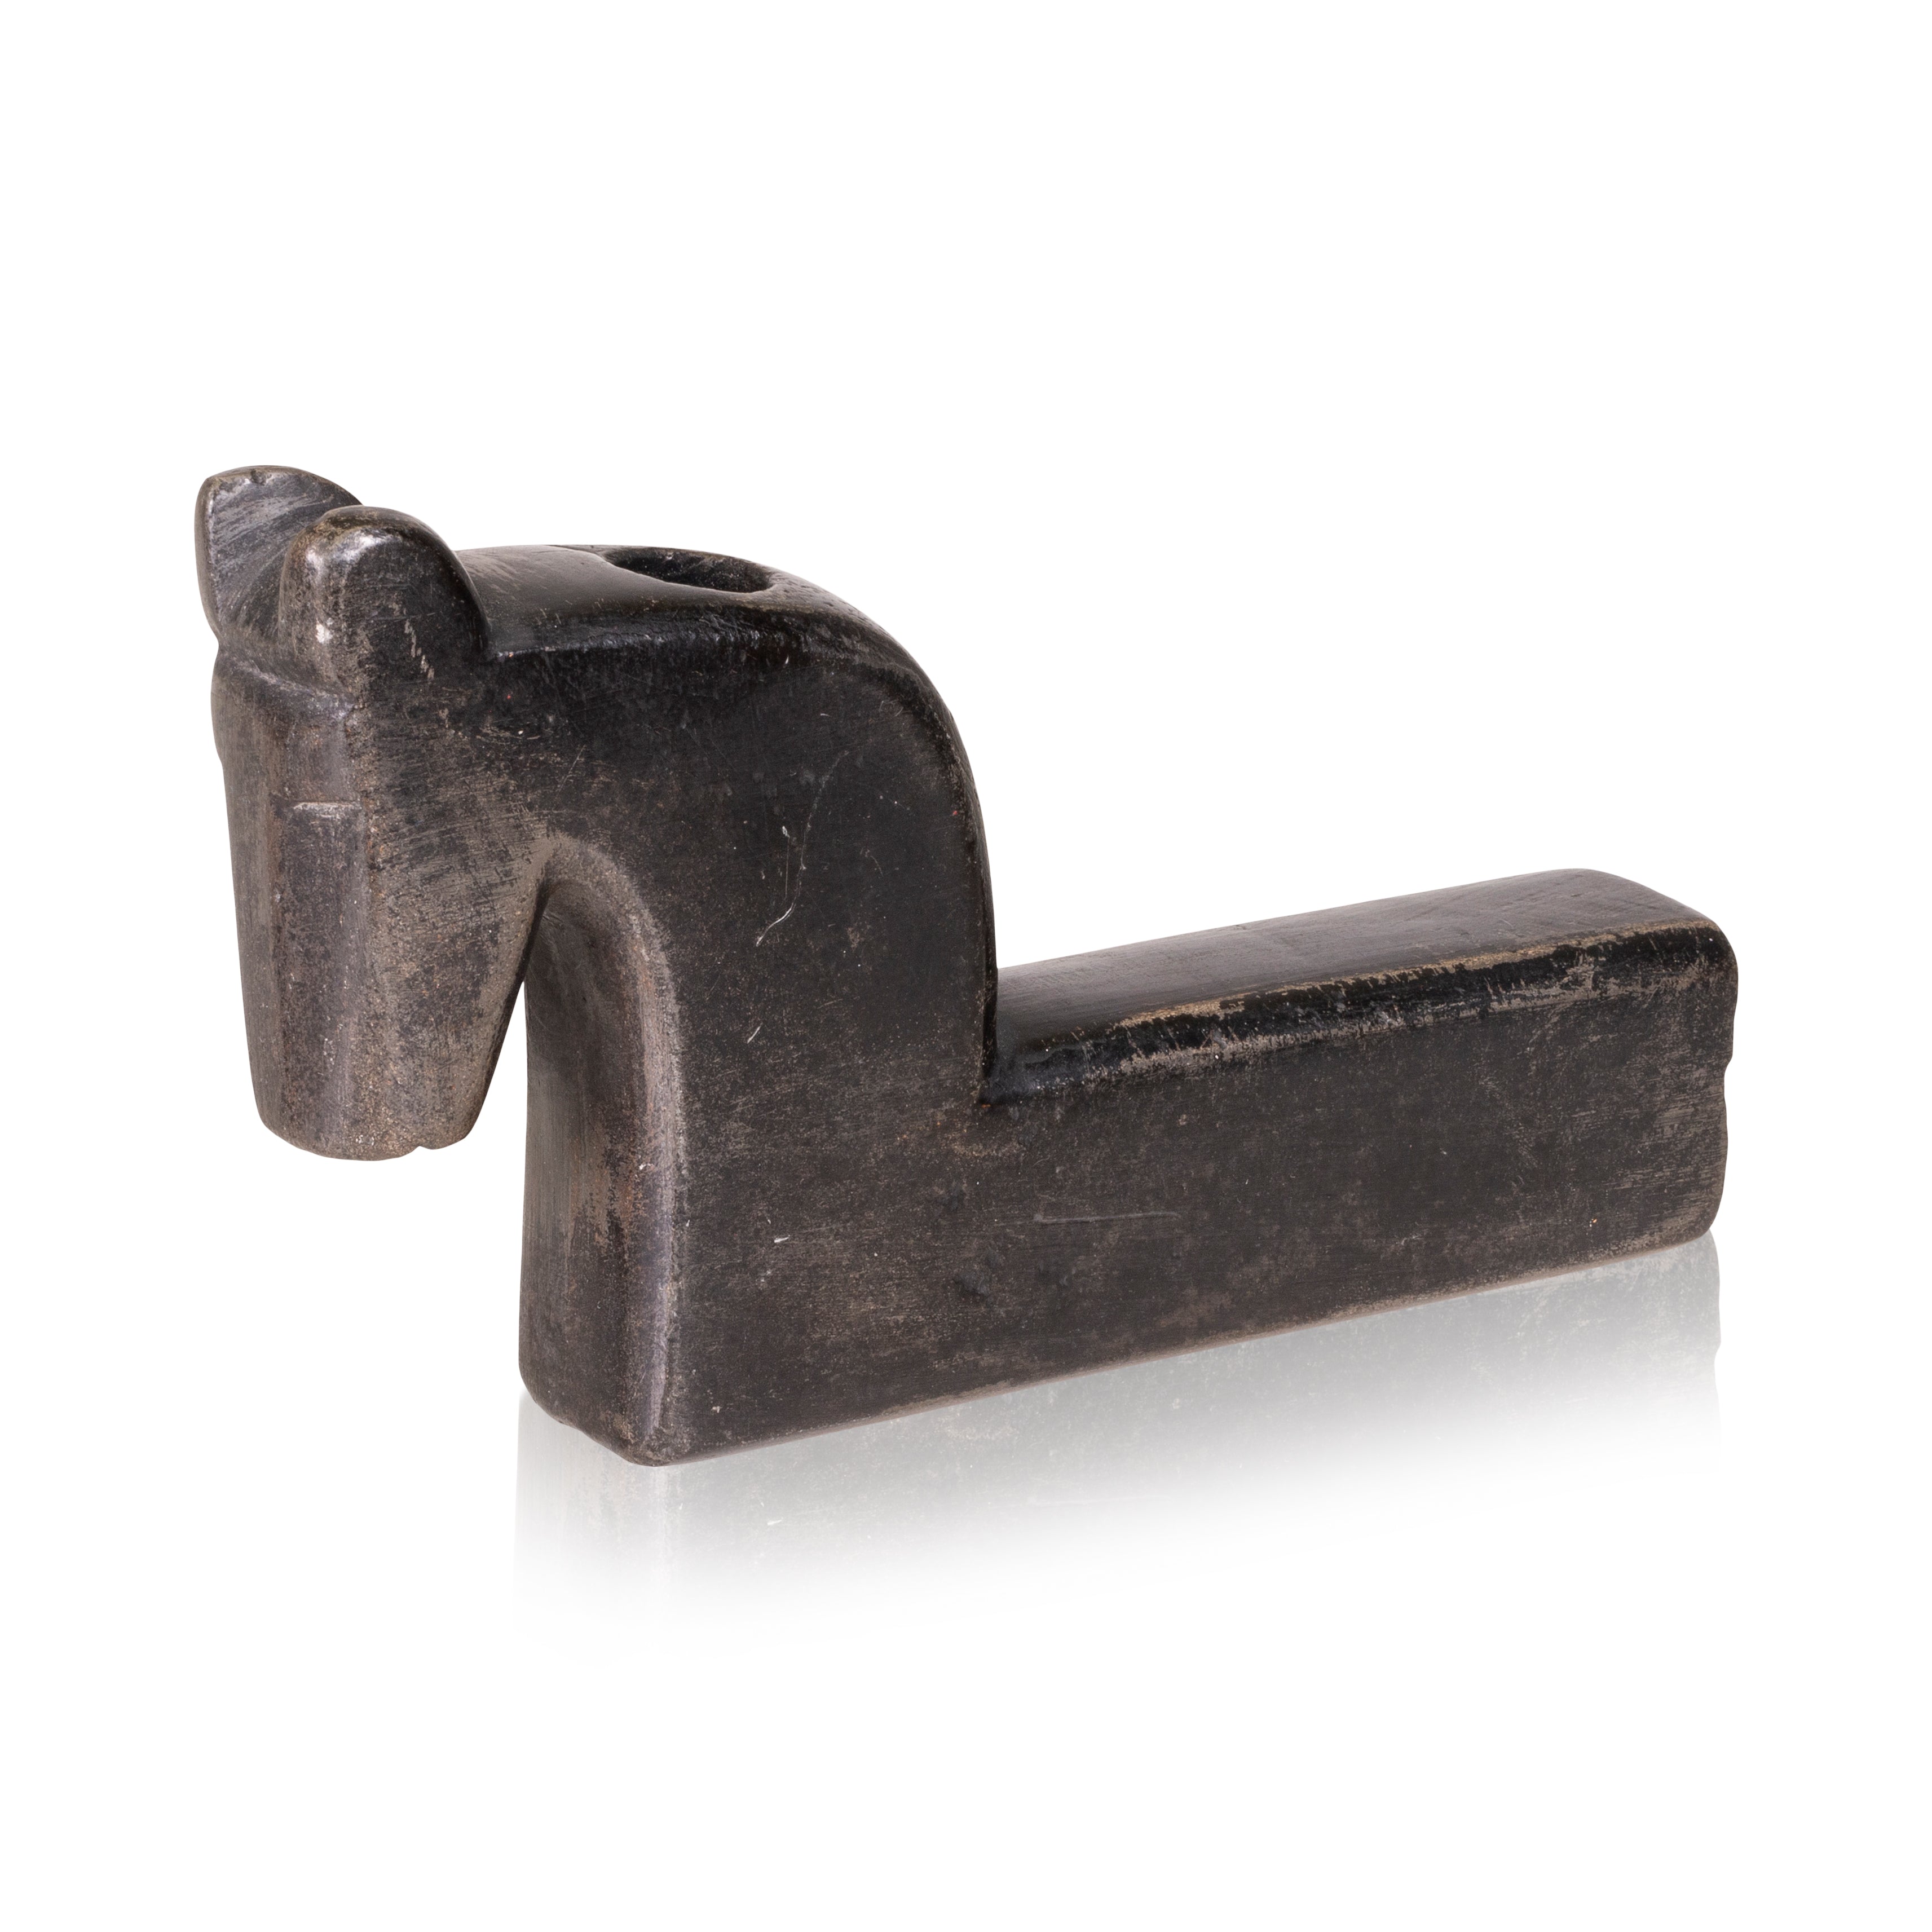 Sioux Effigy Horse Pipe, Native, Pipe, Steatite